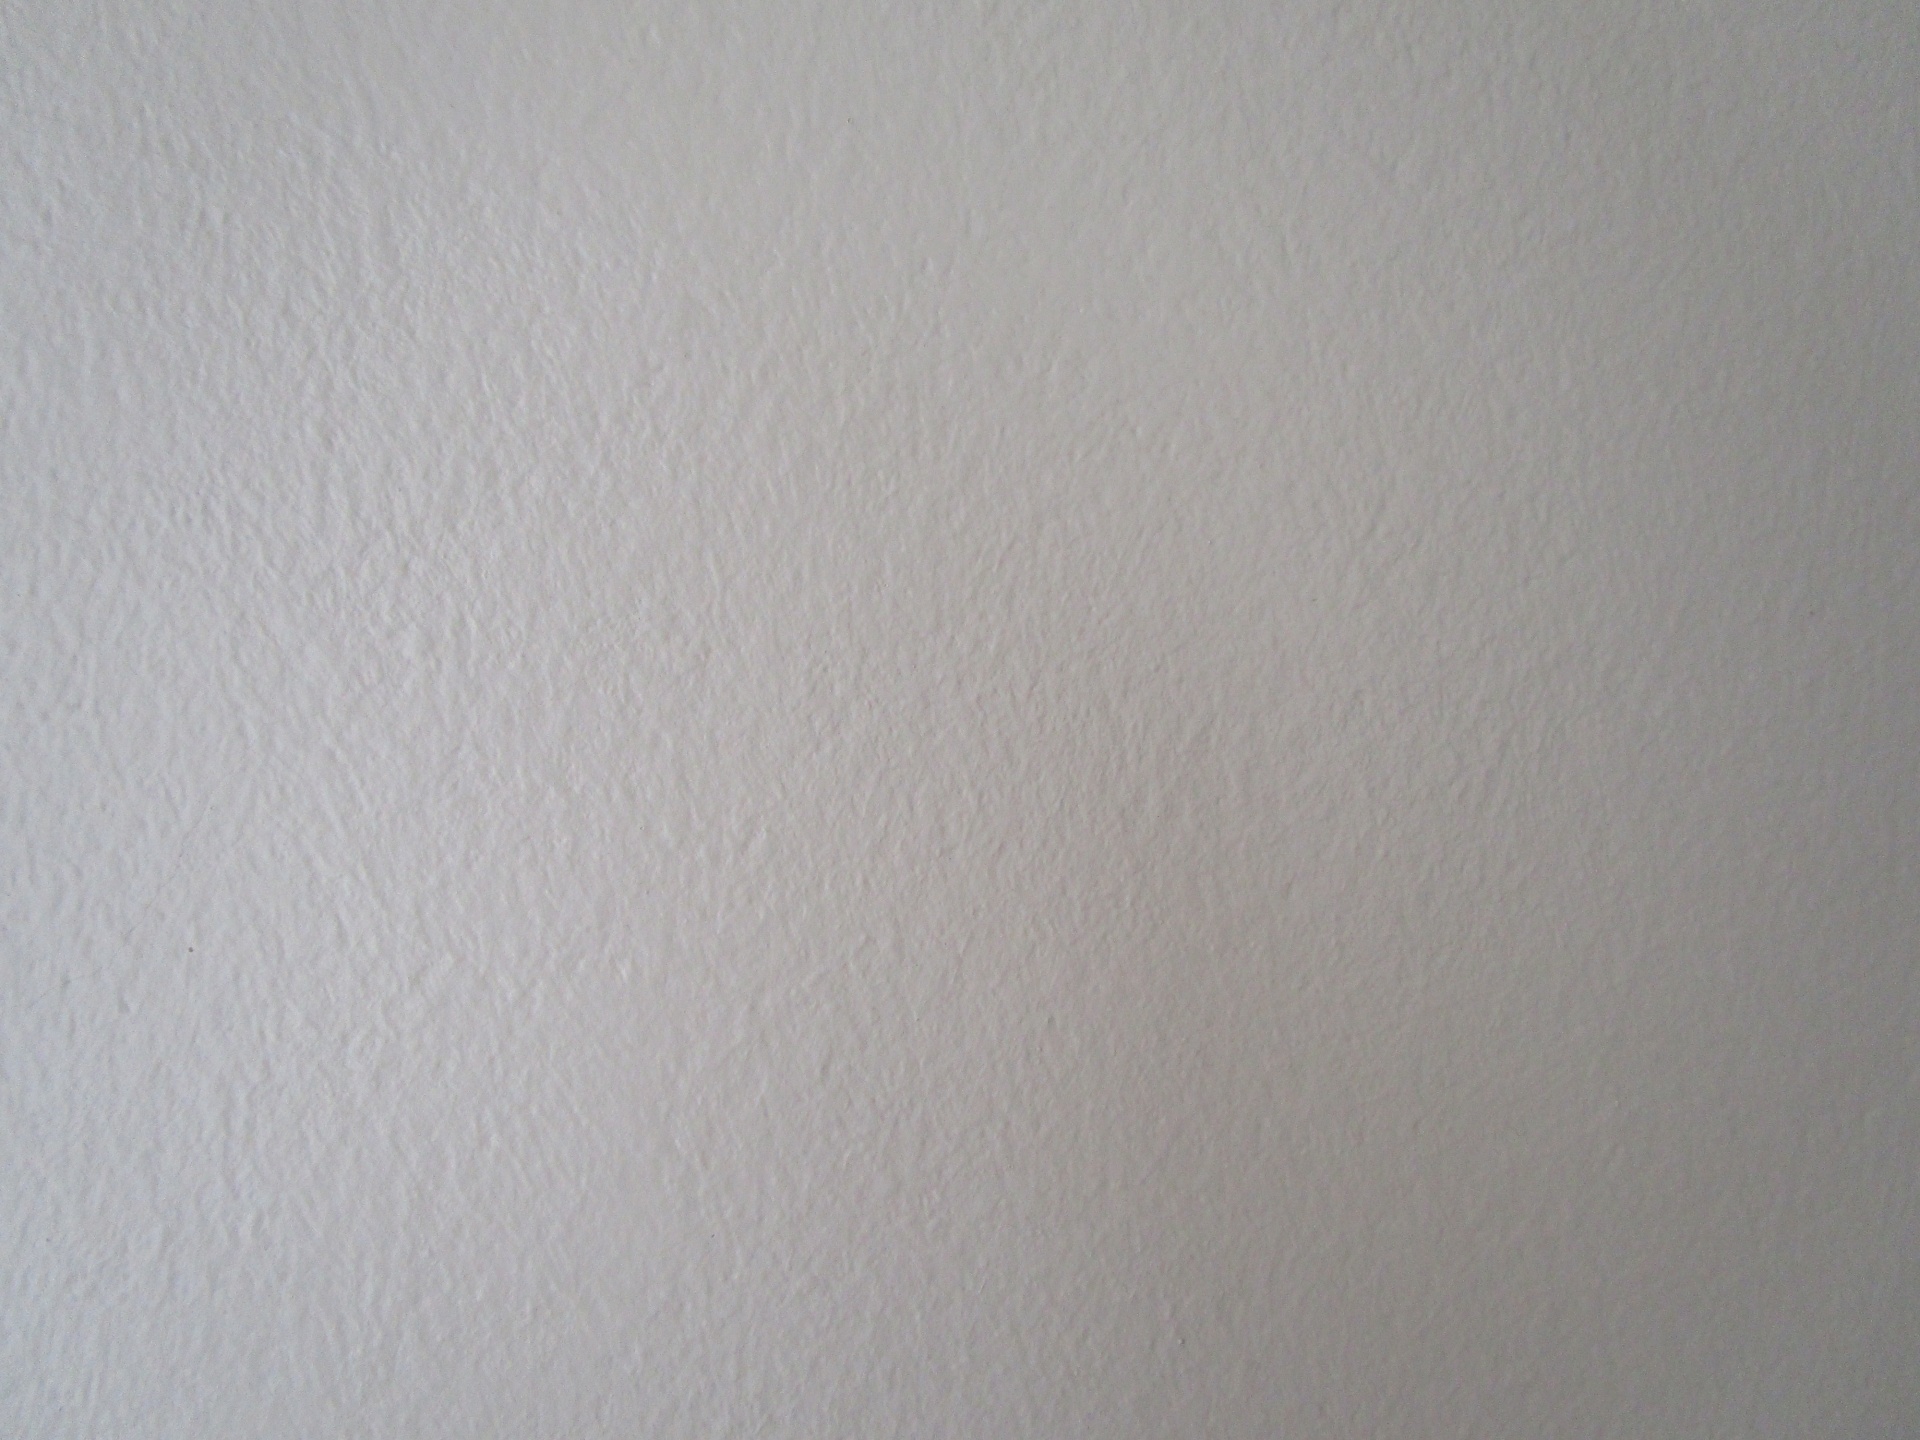 Cream Painted Wall Free Stock Photo - Public Domain Pictures